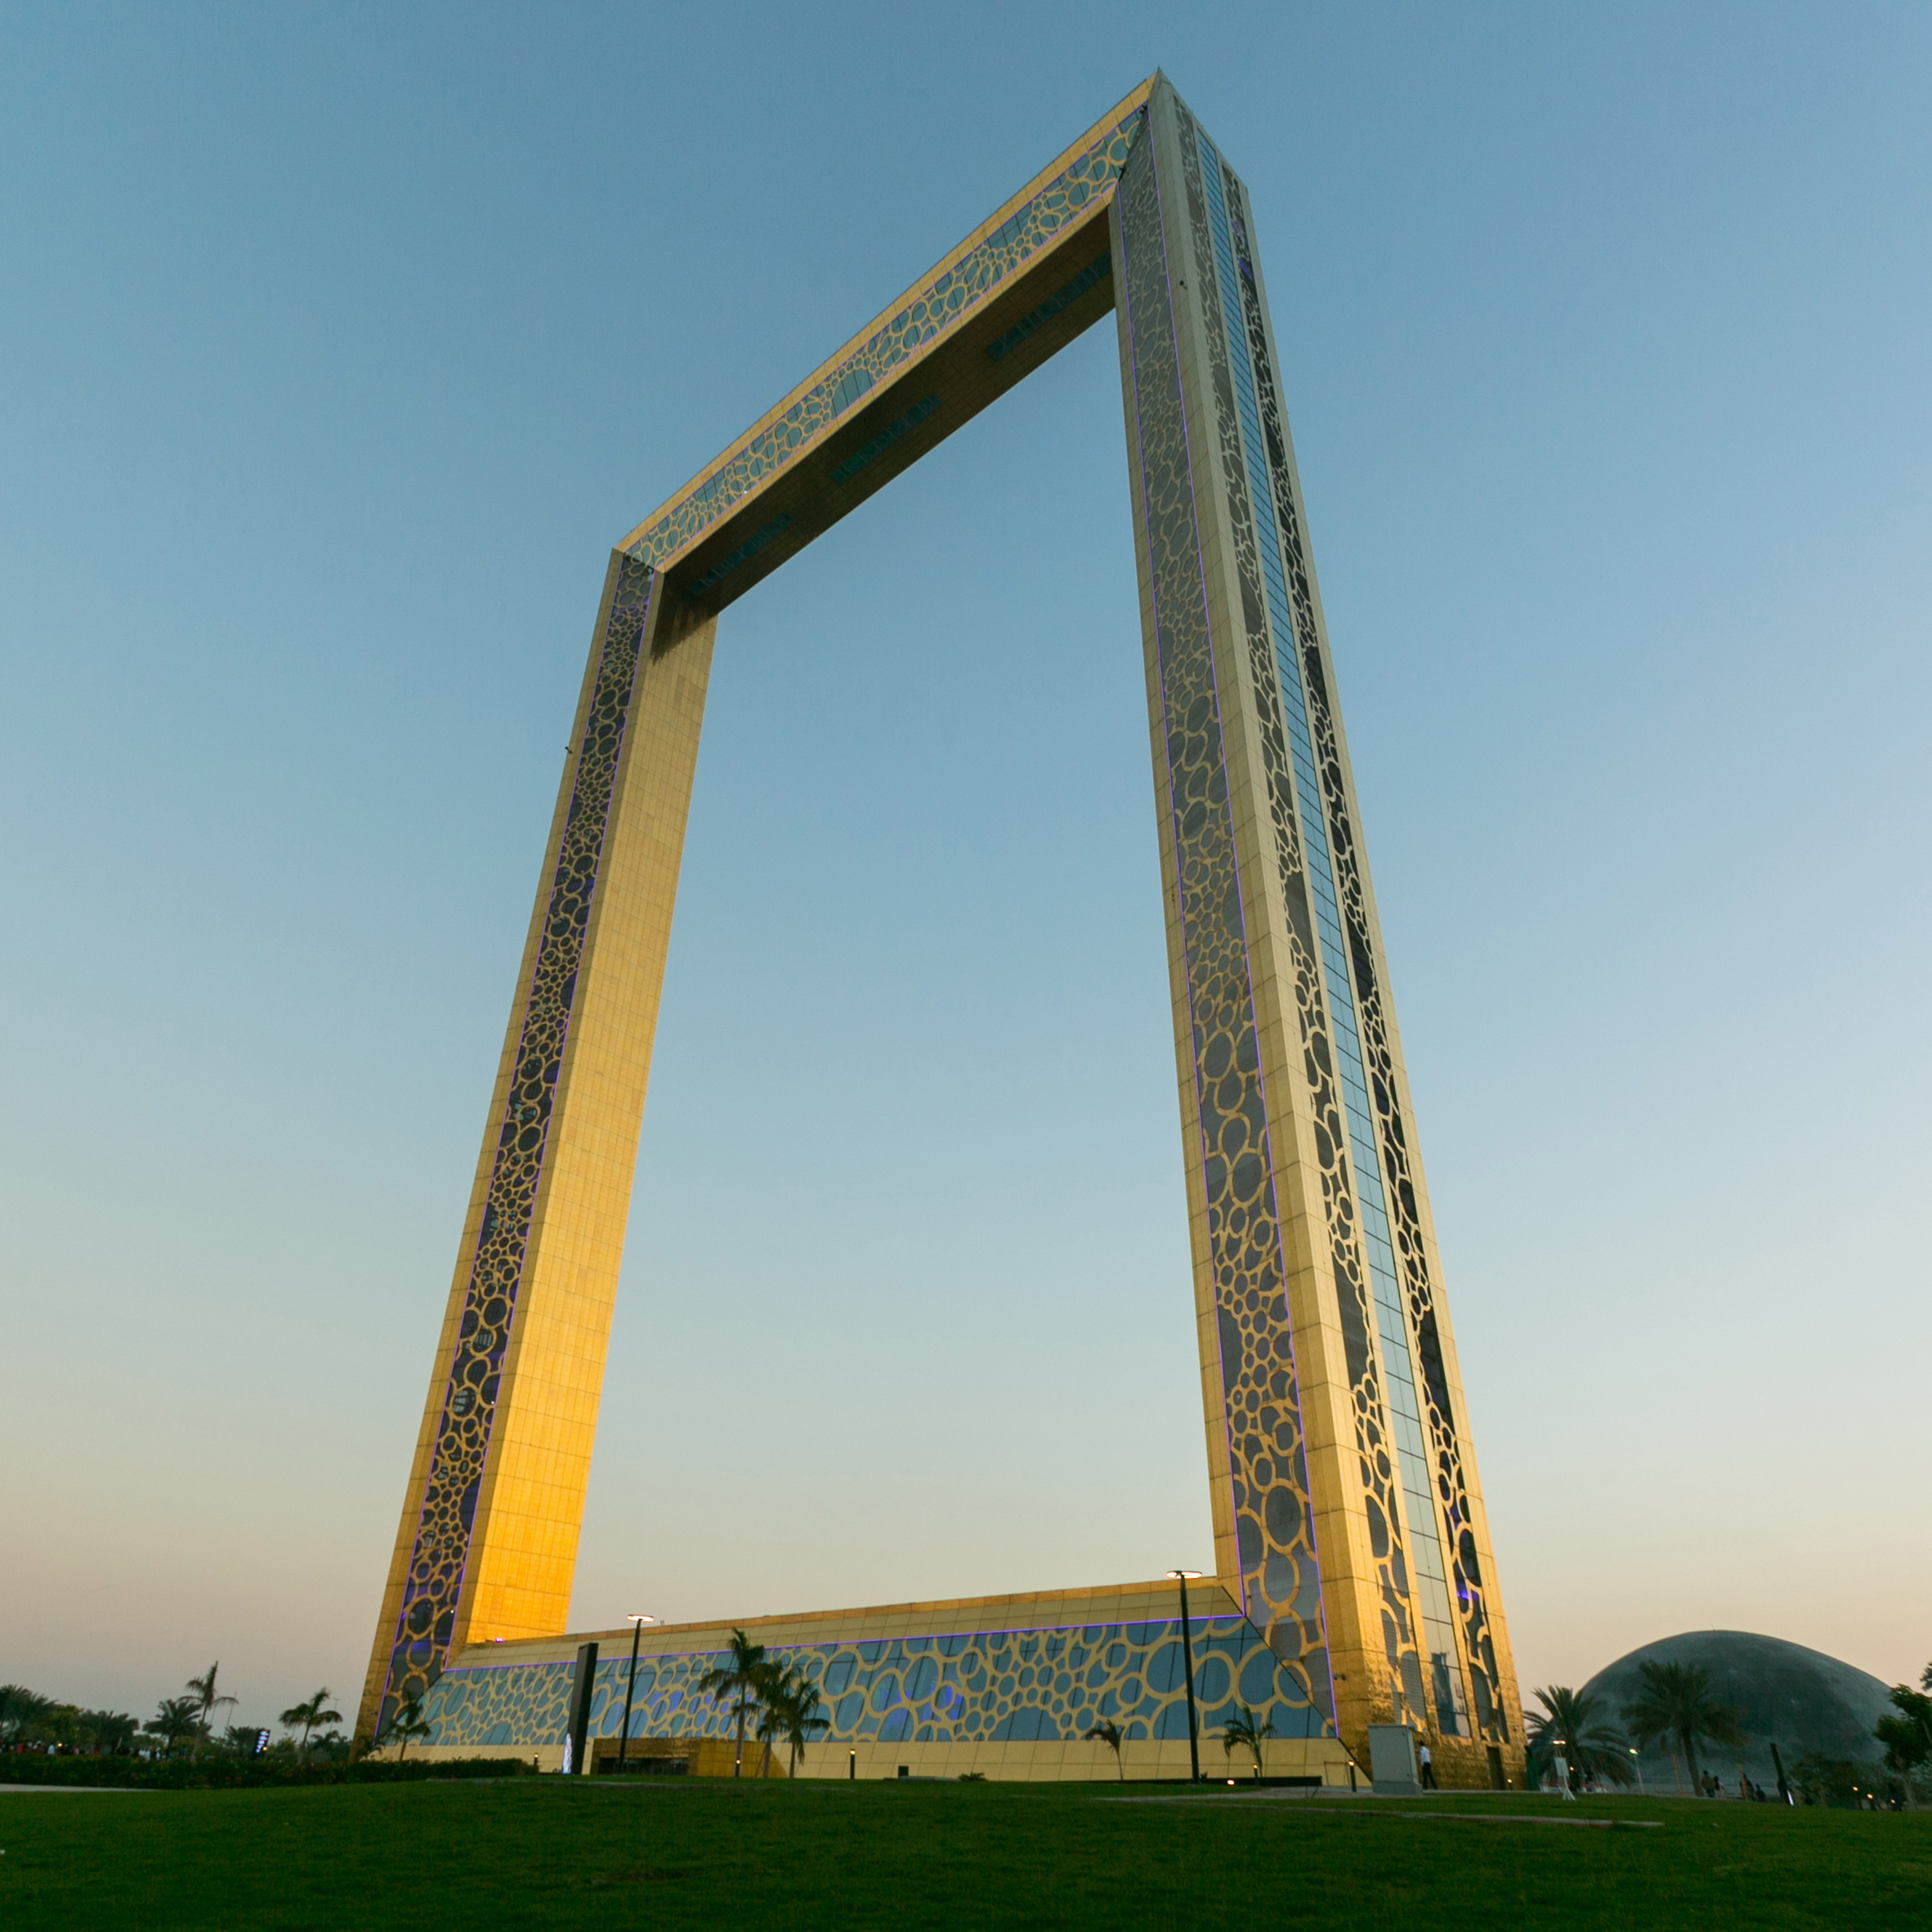 Dubai Frame opens amid claims of copyright infringement